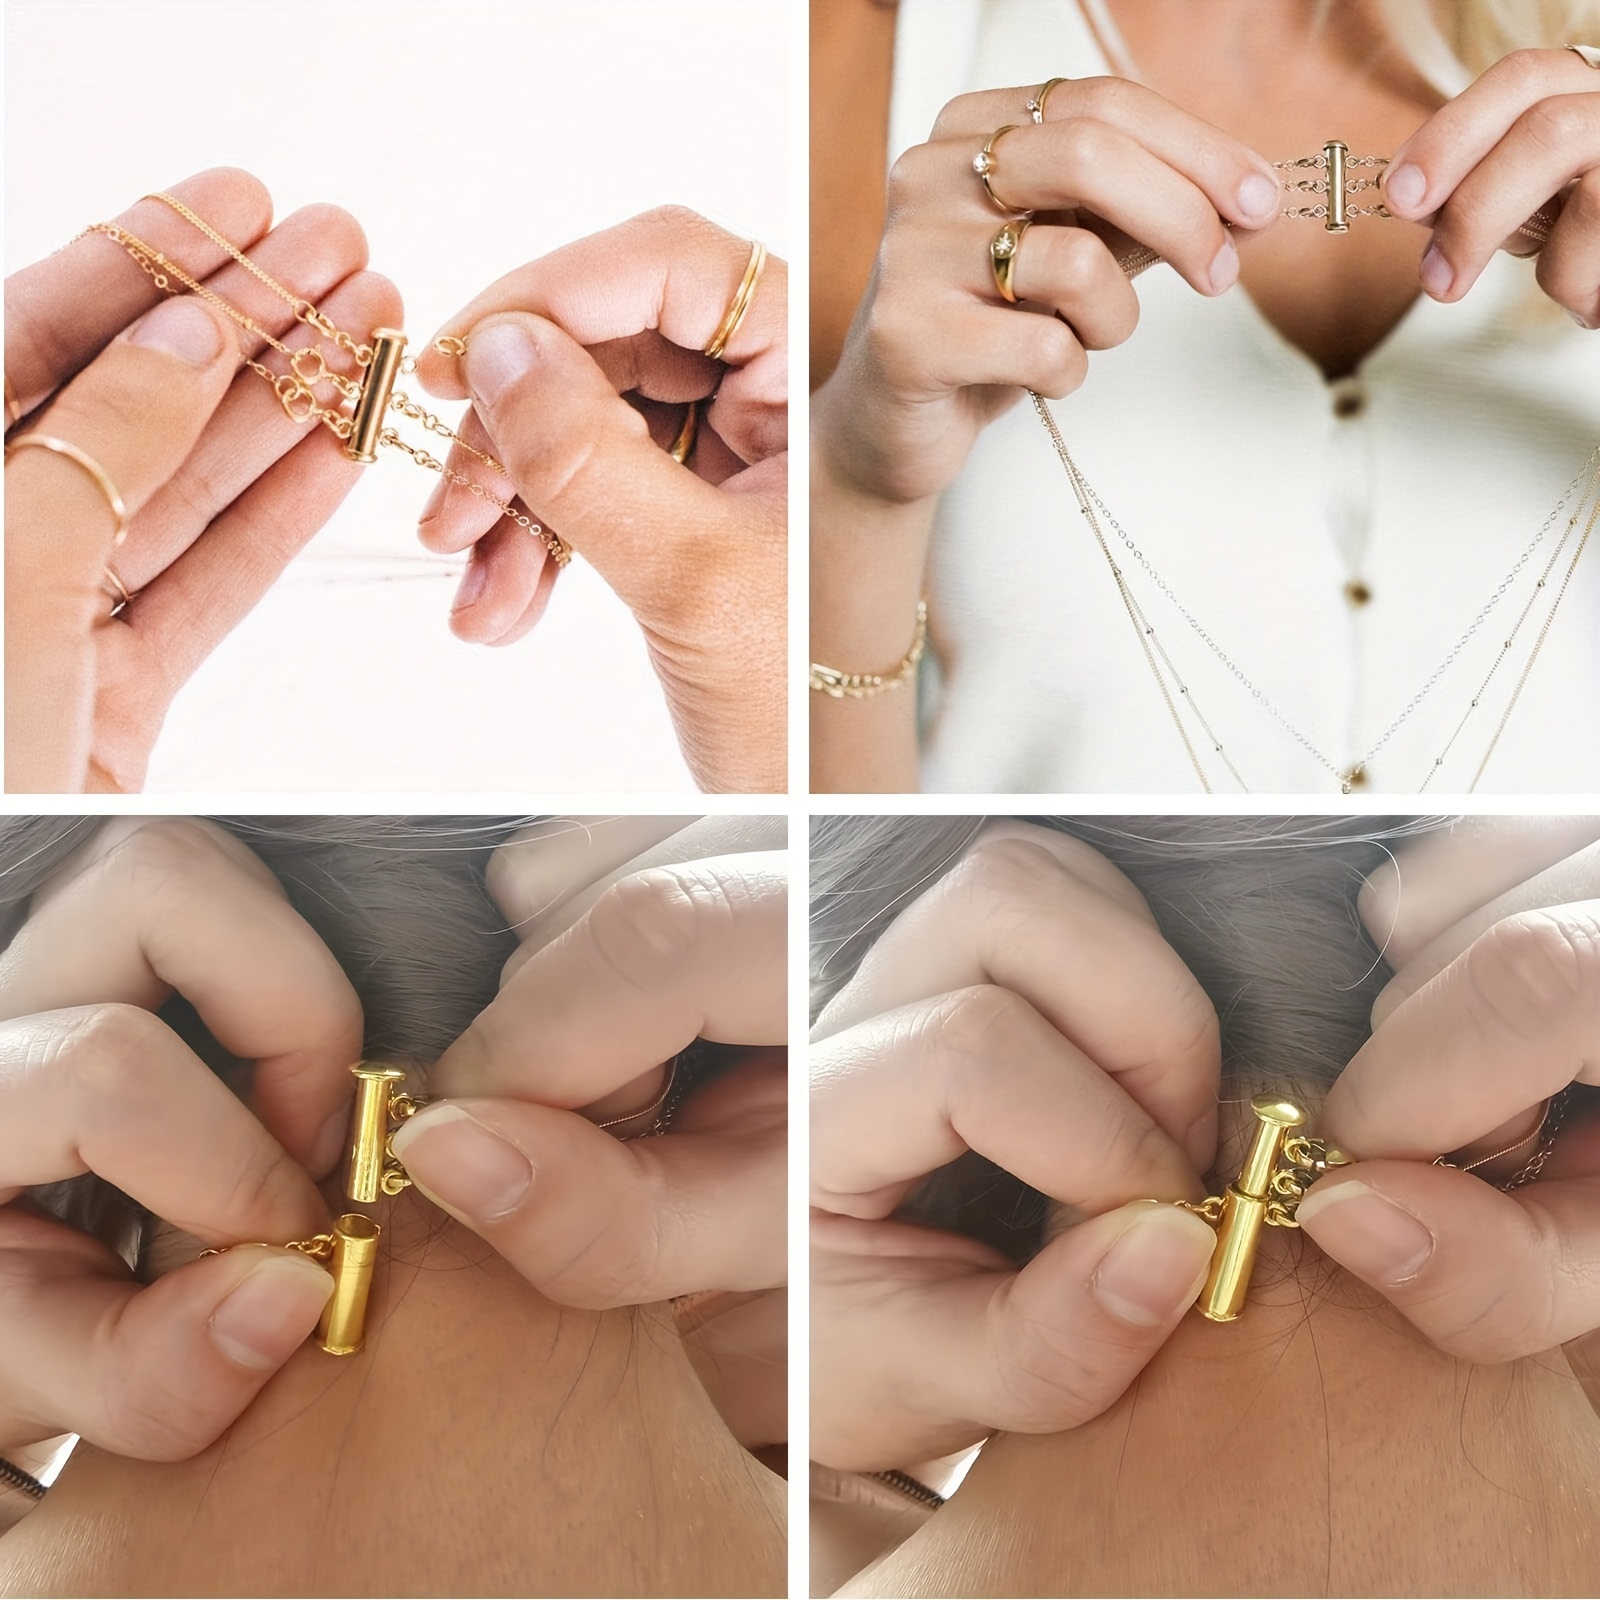 5Pcs Layered Necklace Spacer Clasp, Magnetic Slide Clasp Lock Necklace  Connector Multi Strands Slide Tube Clasps